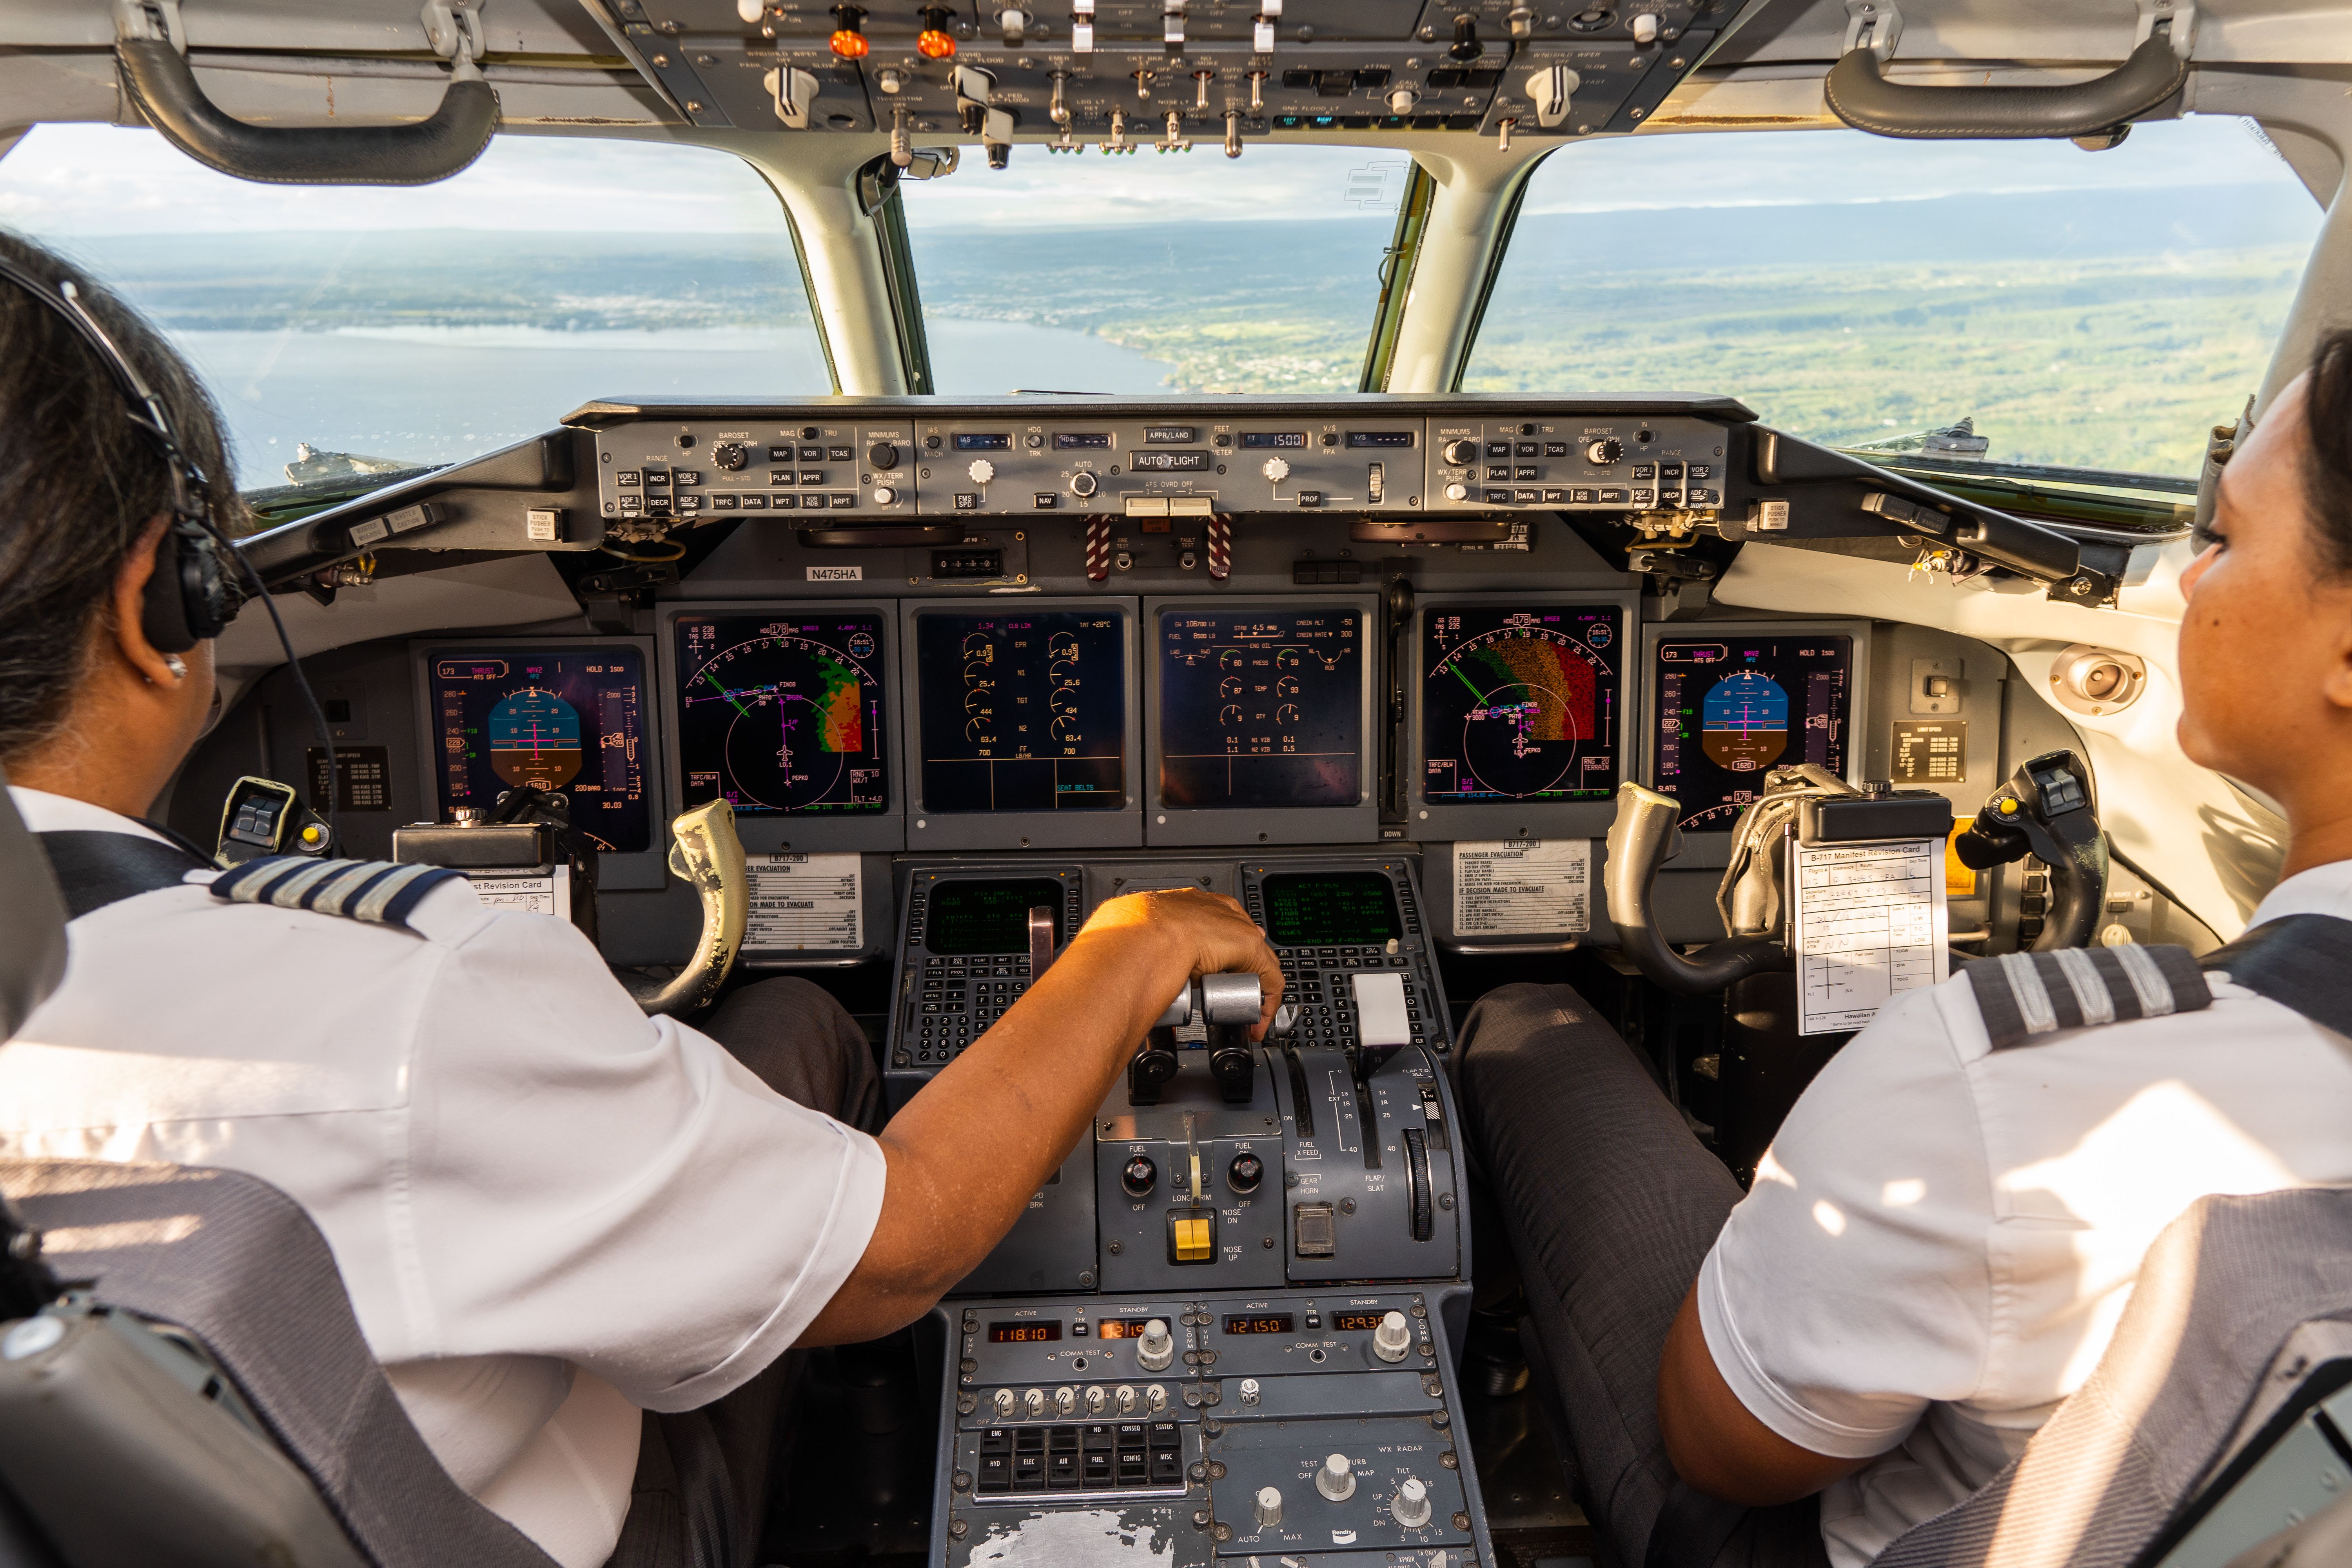 View from inside a Hawaiian Airlines cockpit, as two pilots are flying the aircraft.